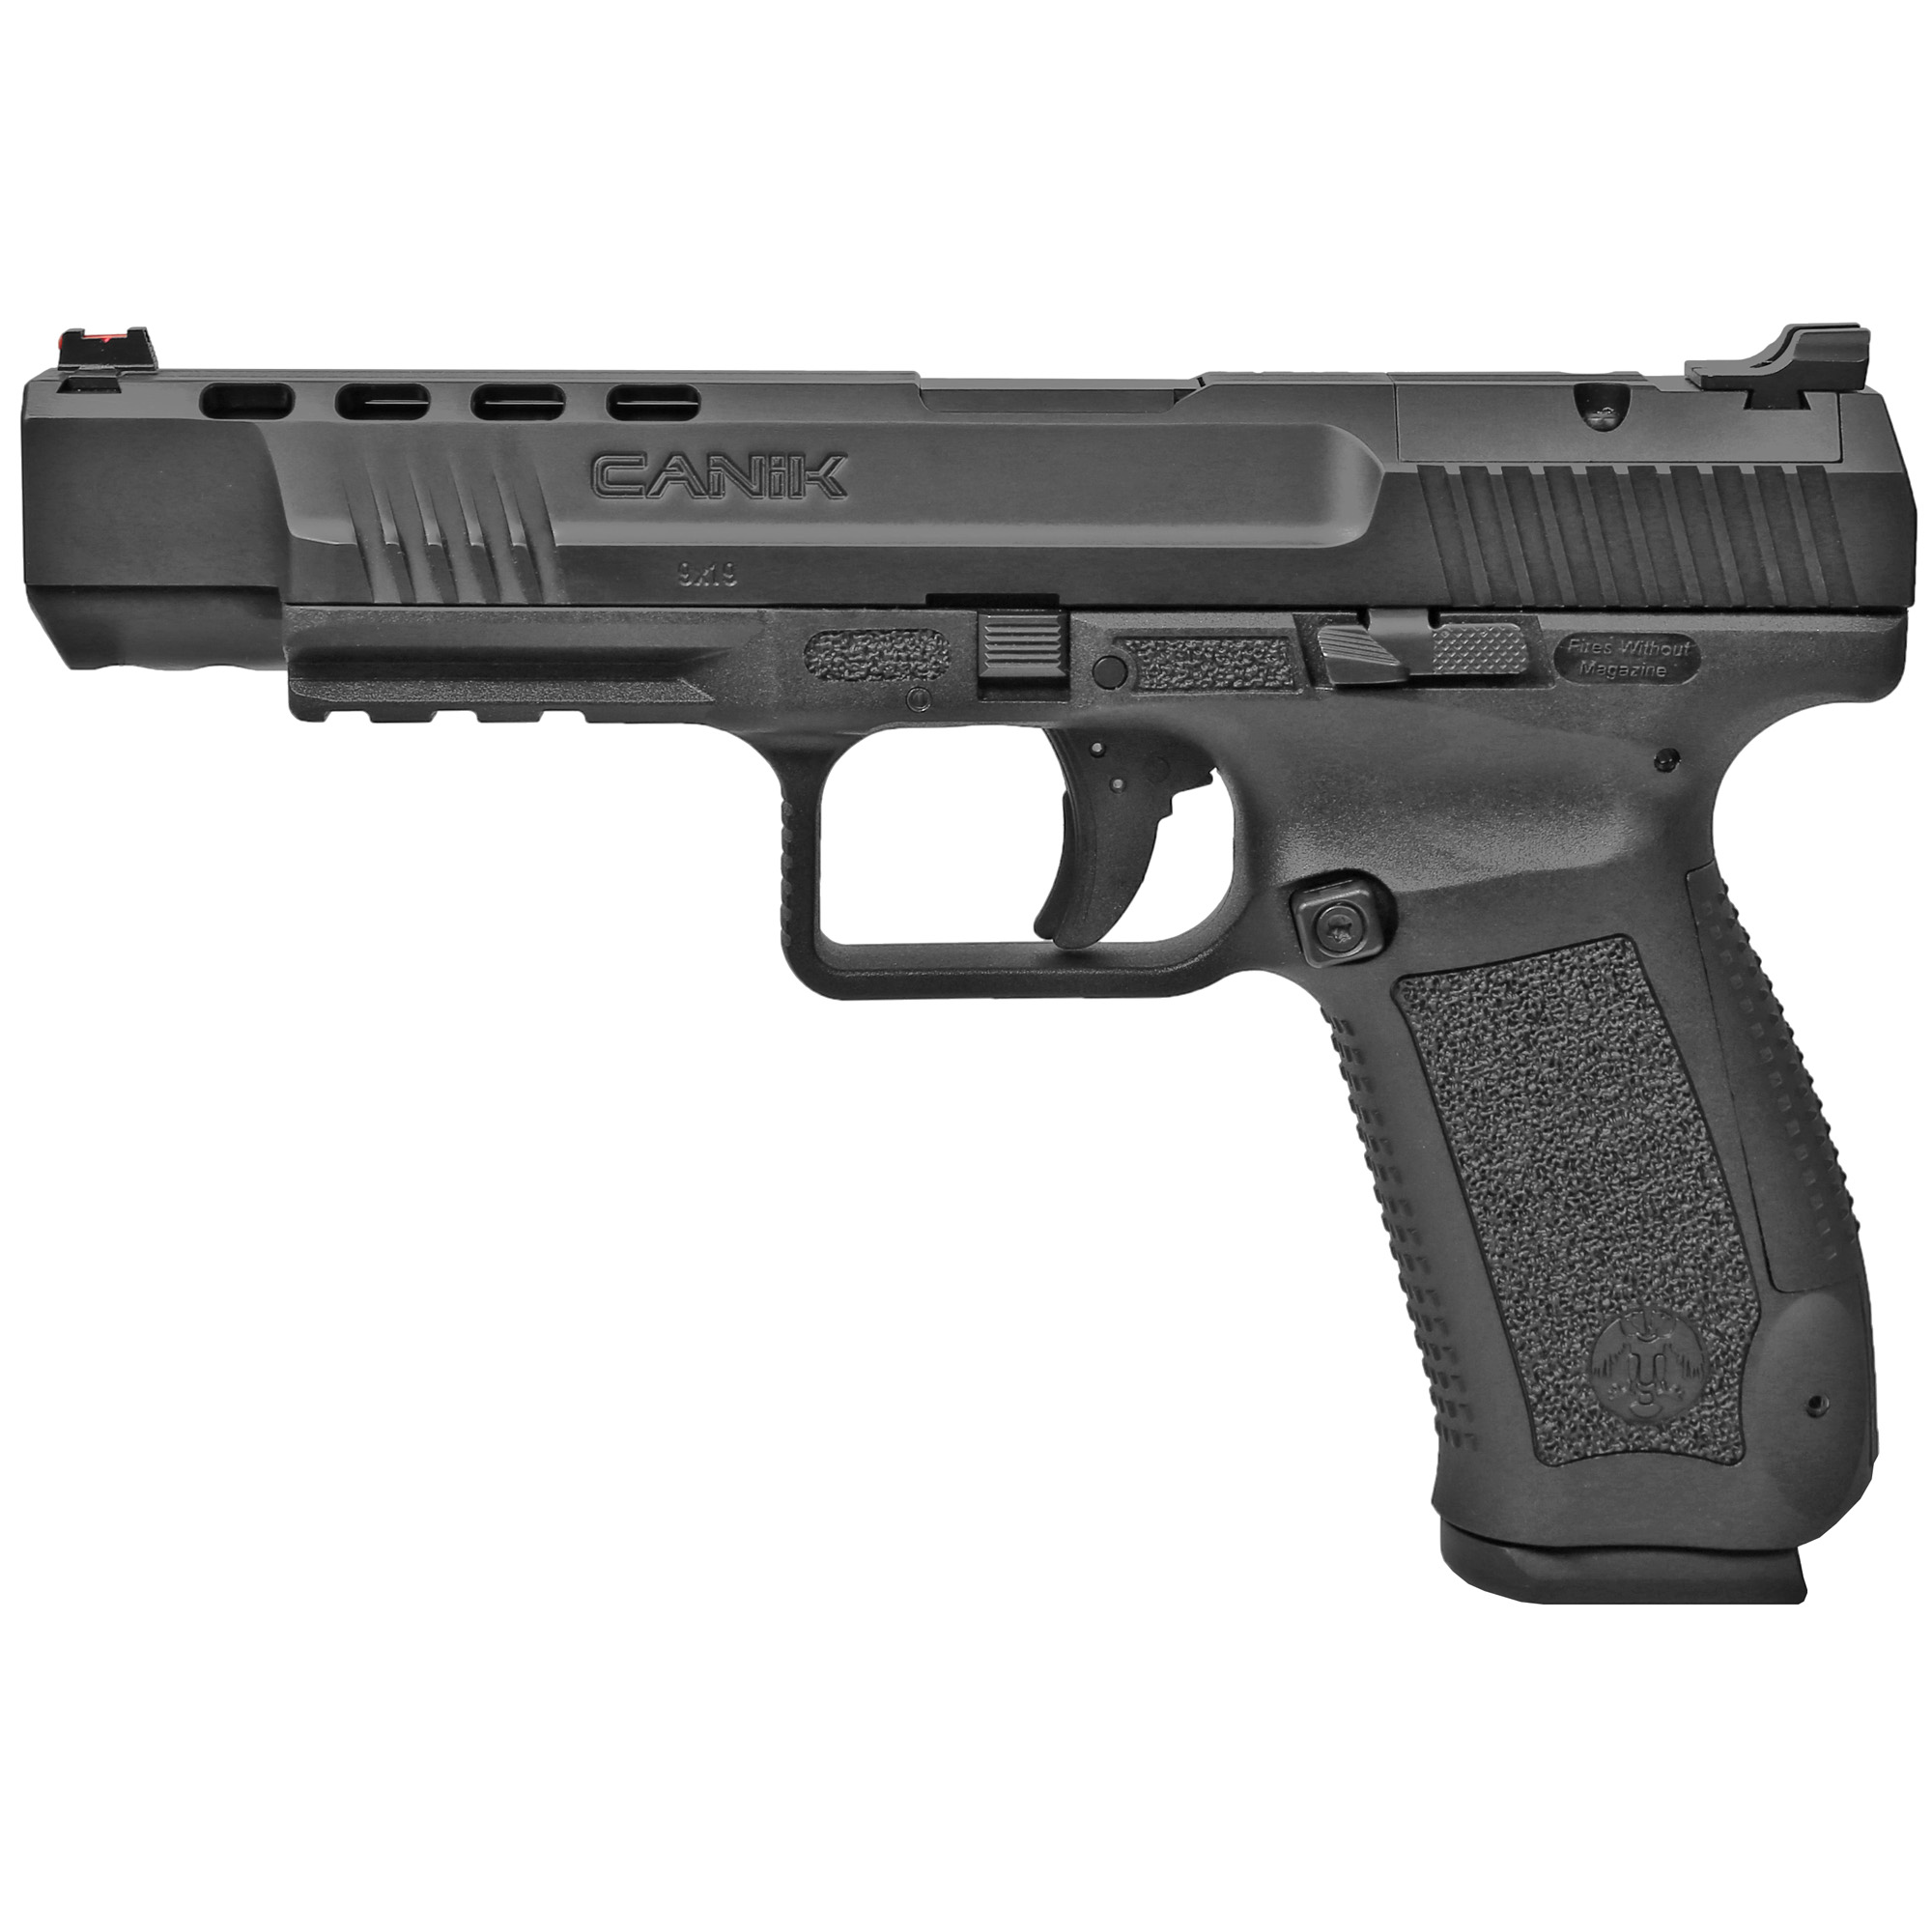 CANIK TP9SFX 9MM 5.2 20RD BLK OUT